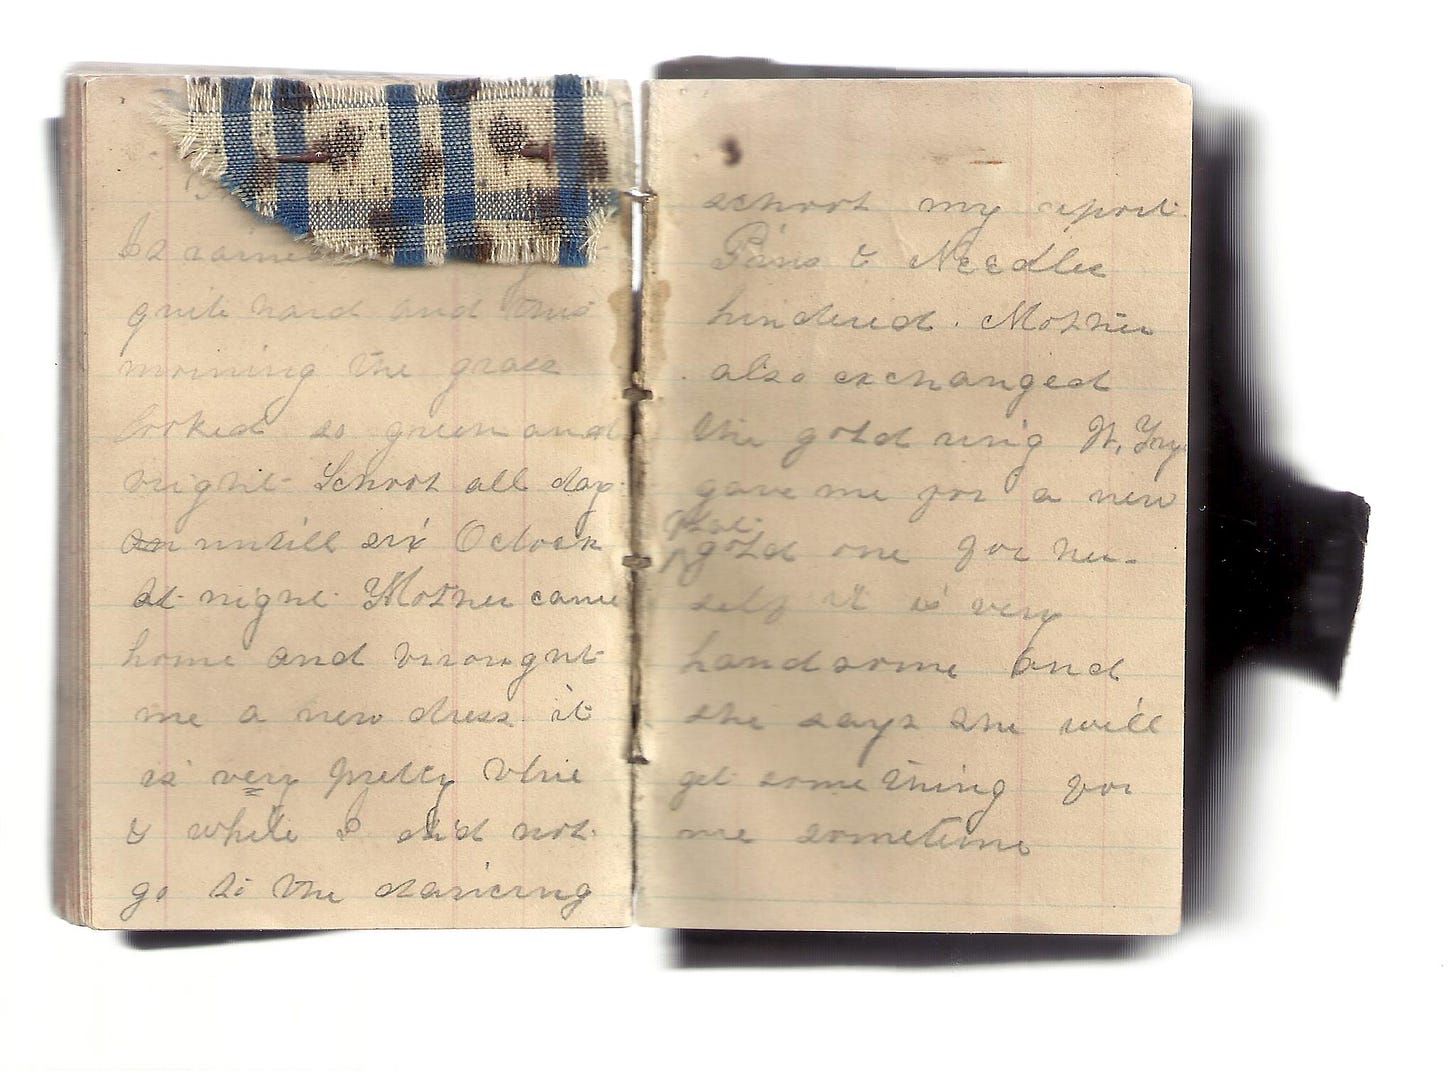 a small diary open to display two pages of cursive handwriting with a scrap of plaid dress fabric attached to one page